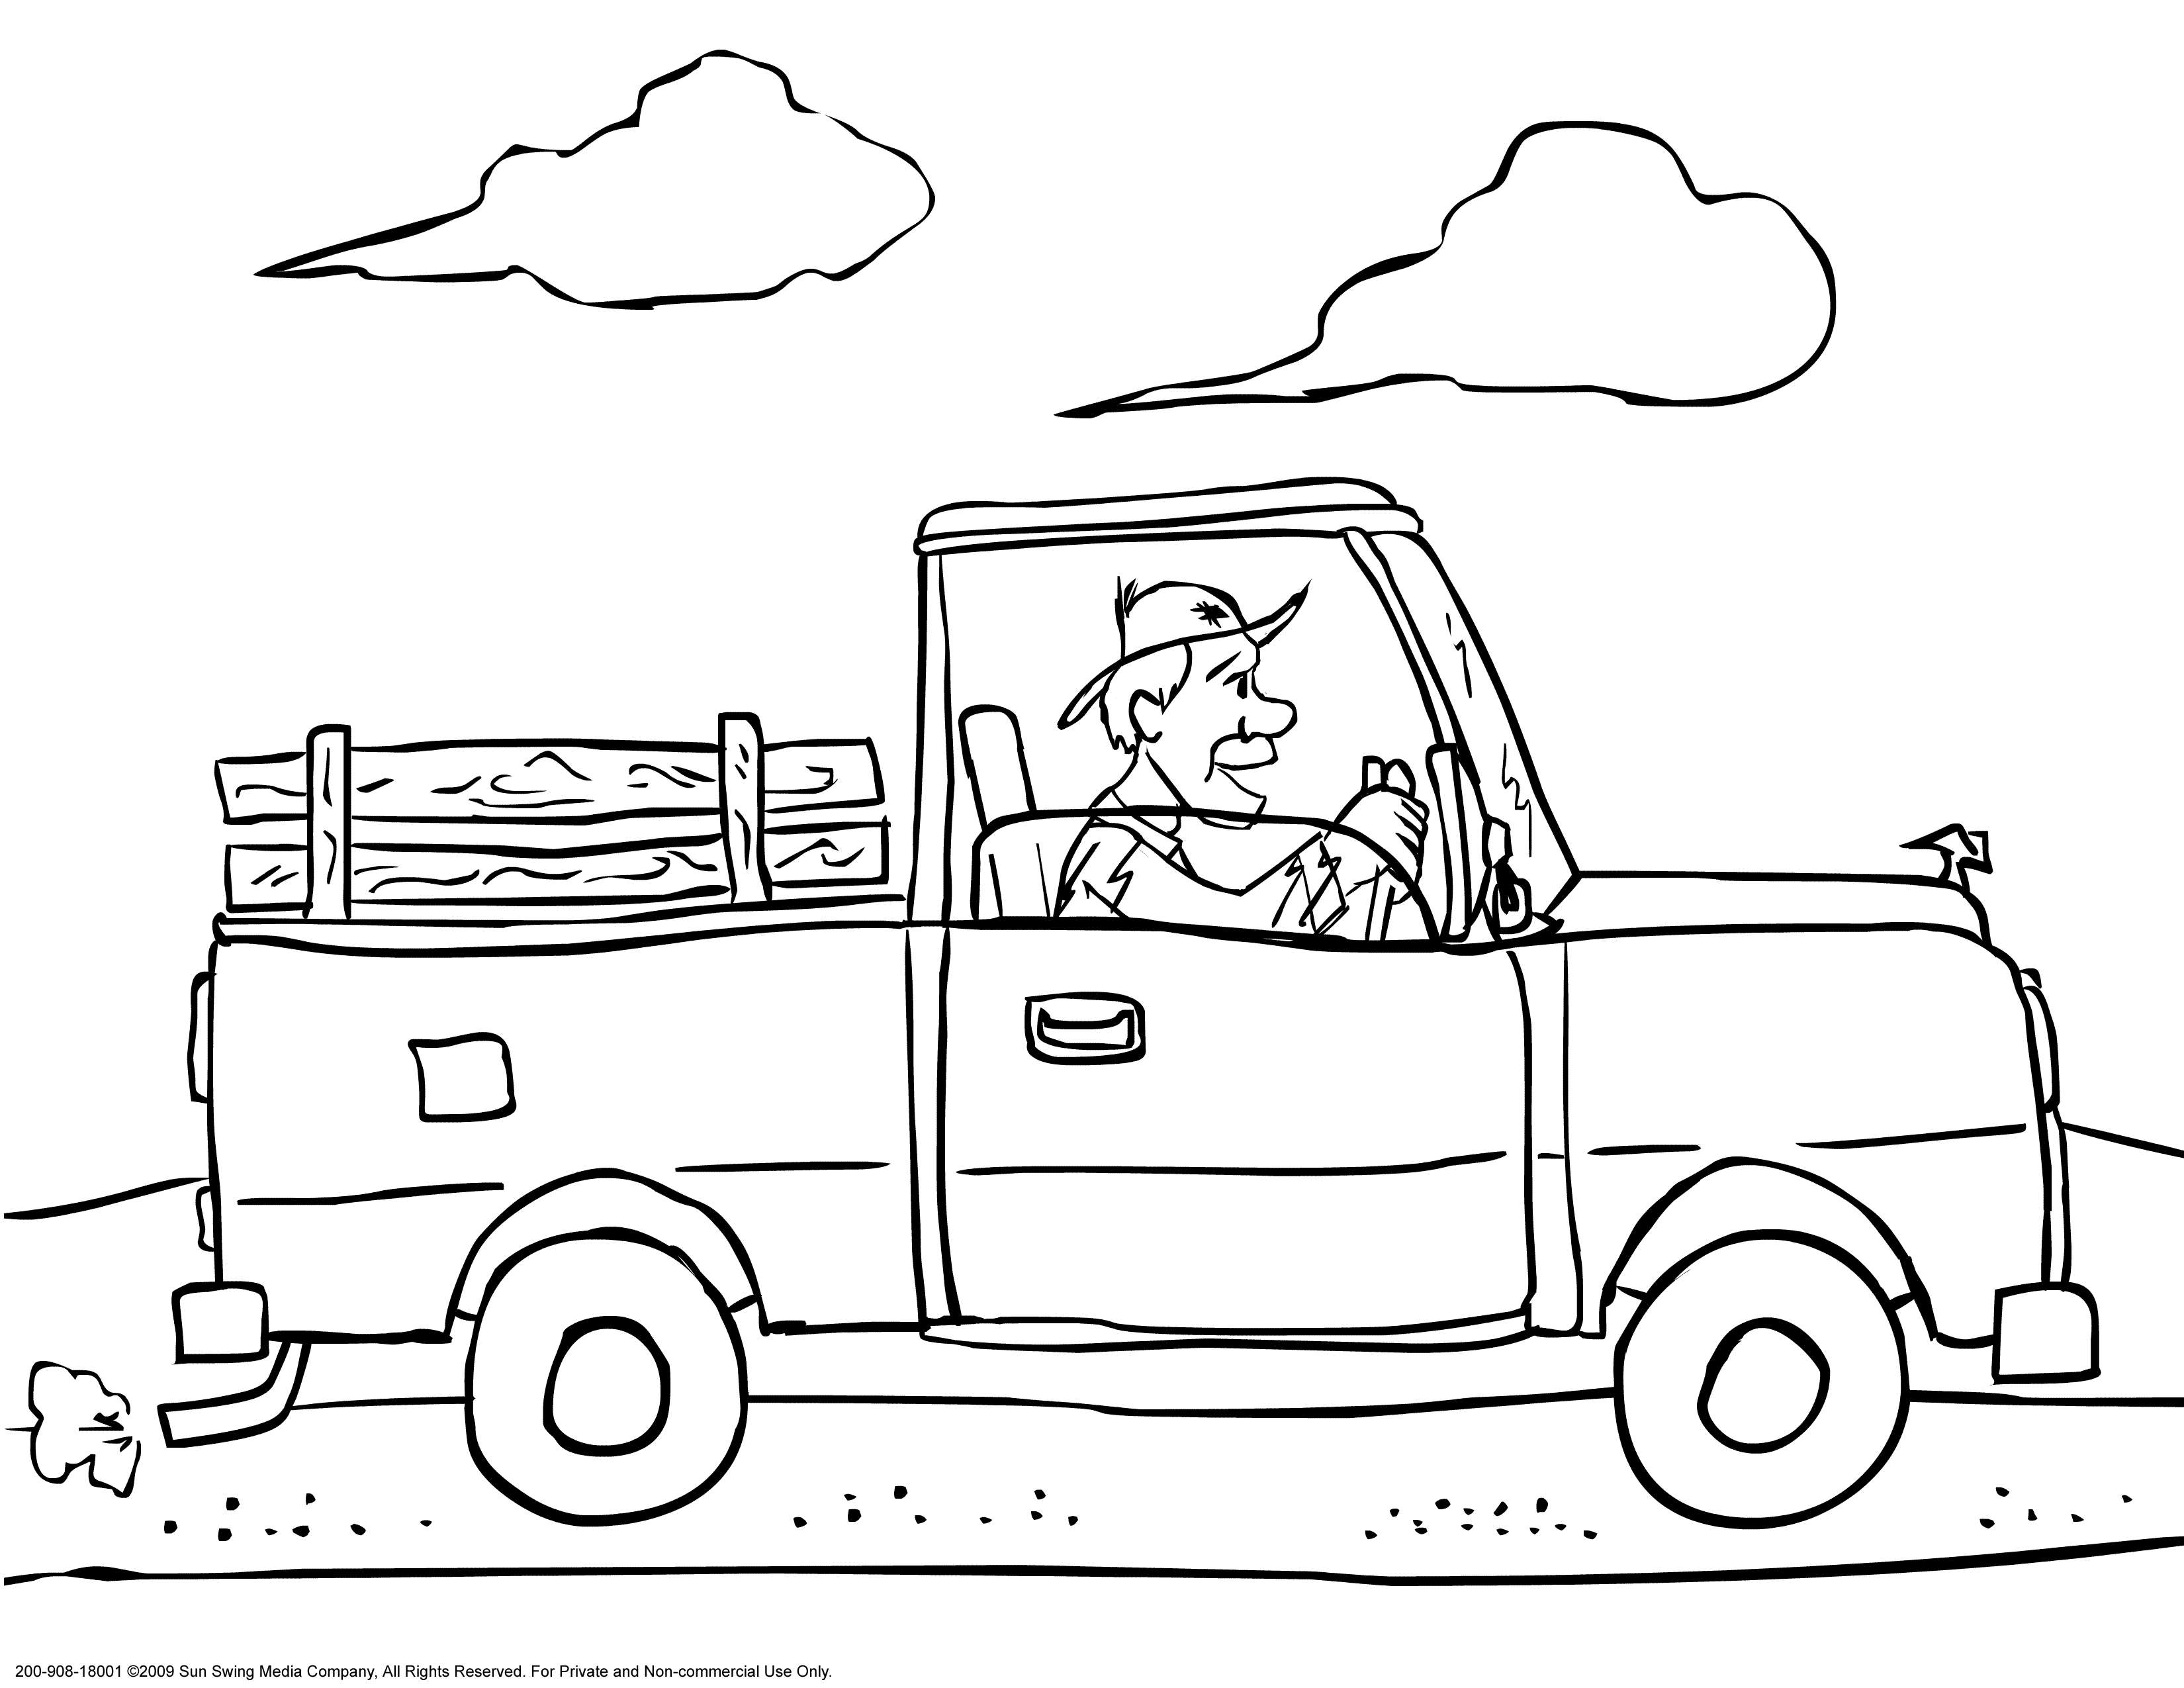 car coloring pages for preschoolers princess peach coloring pages online gtm ccamish truck pages coloring preschoolers car for 